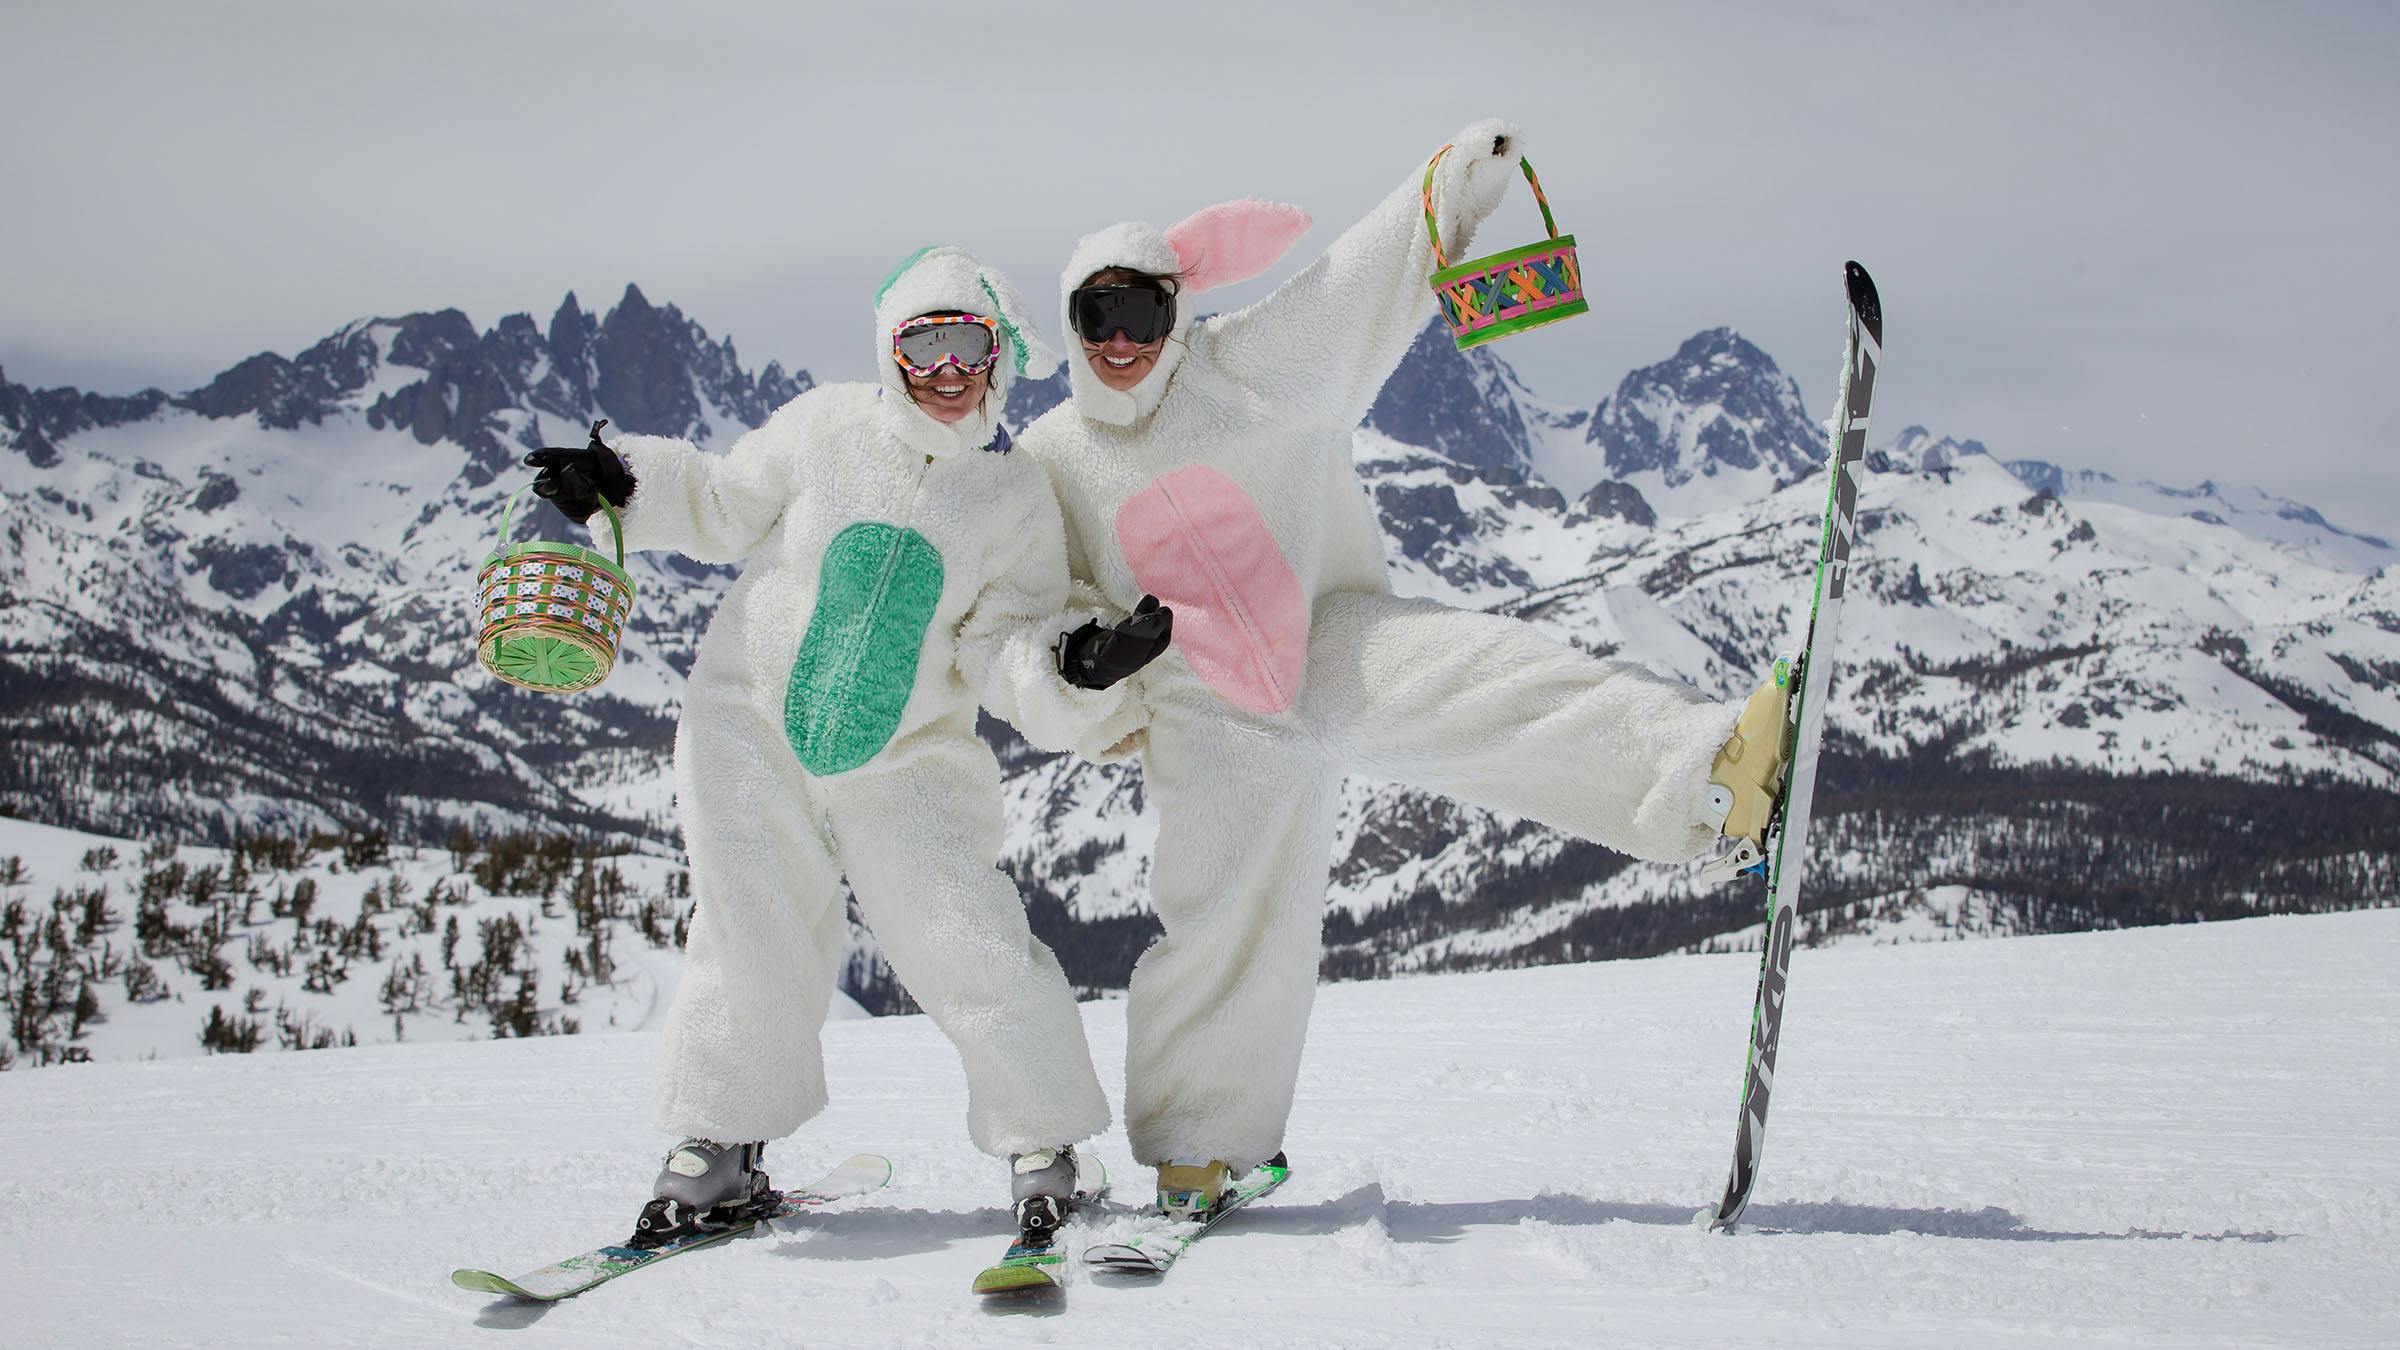 Two Easter Bunnies on skis holding up baskets of eggs on the summit of Mammoth Mountain